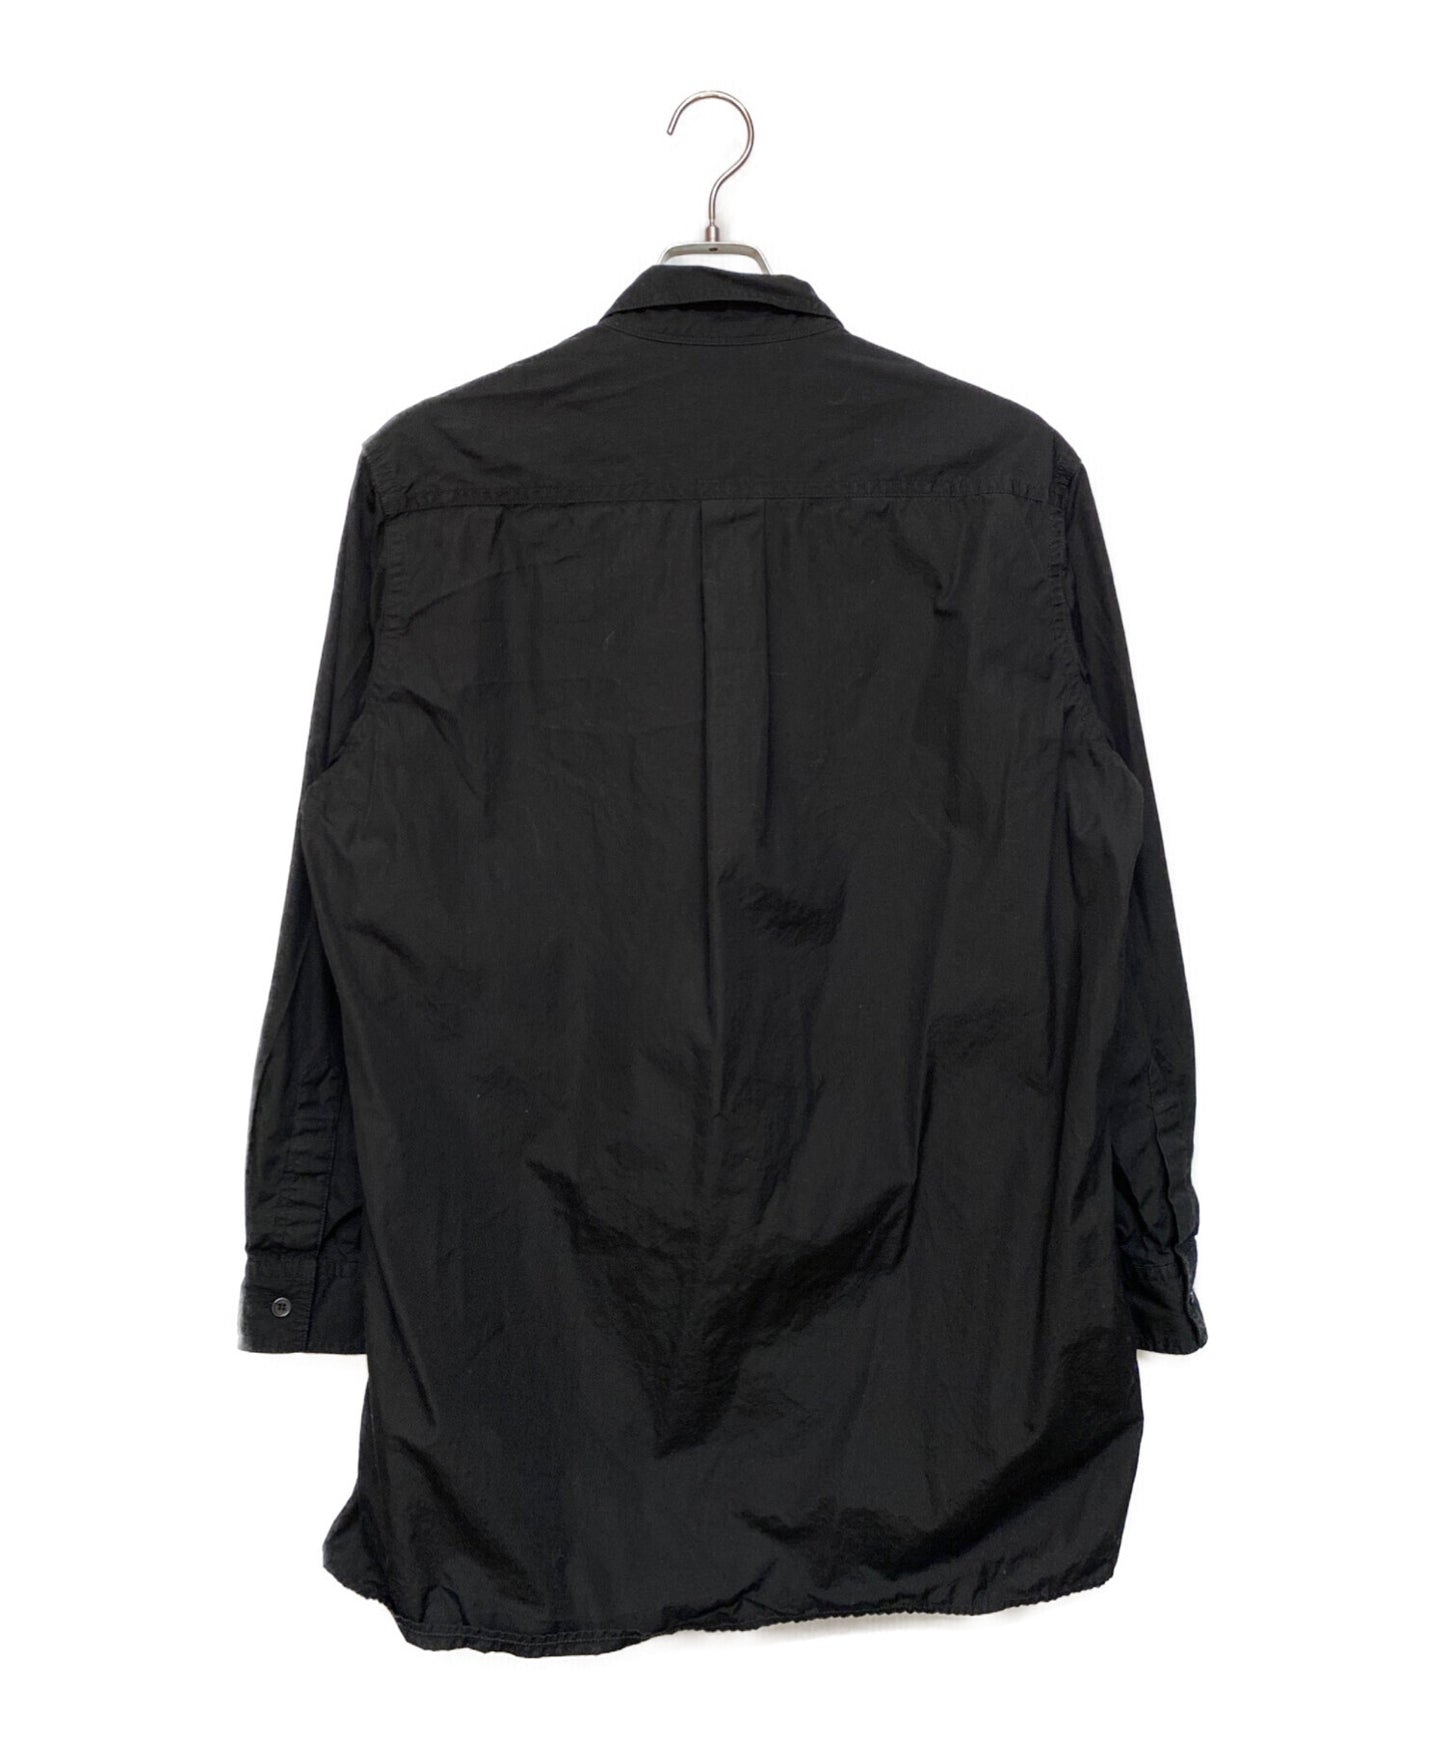 [Pre-owned] Yohji Yamamoto pour homme Standard BIG ring-stitched broadcloth shirt HG-B01-001